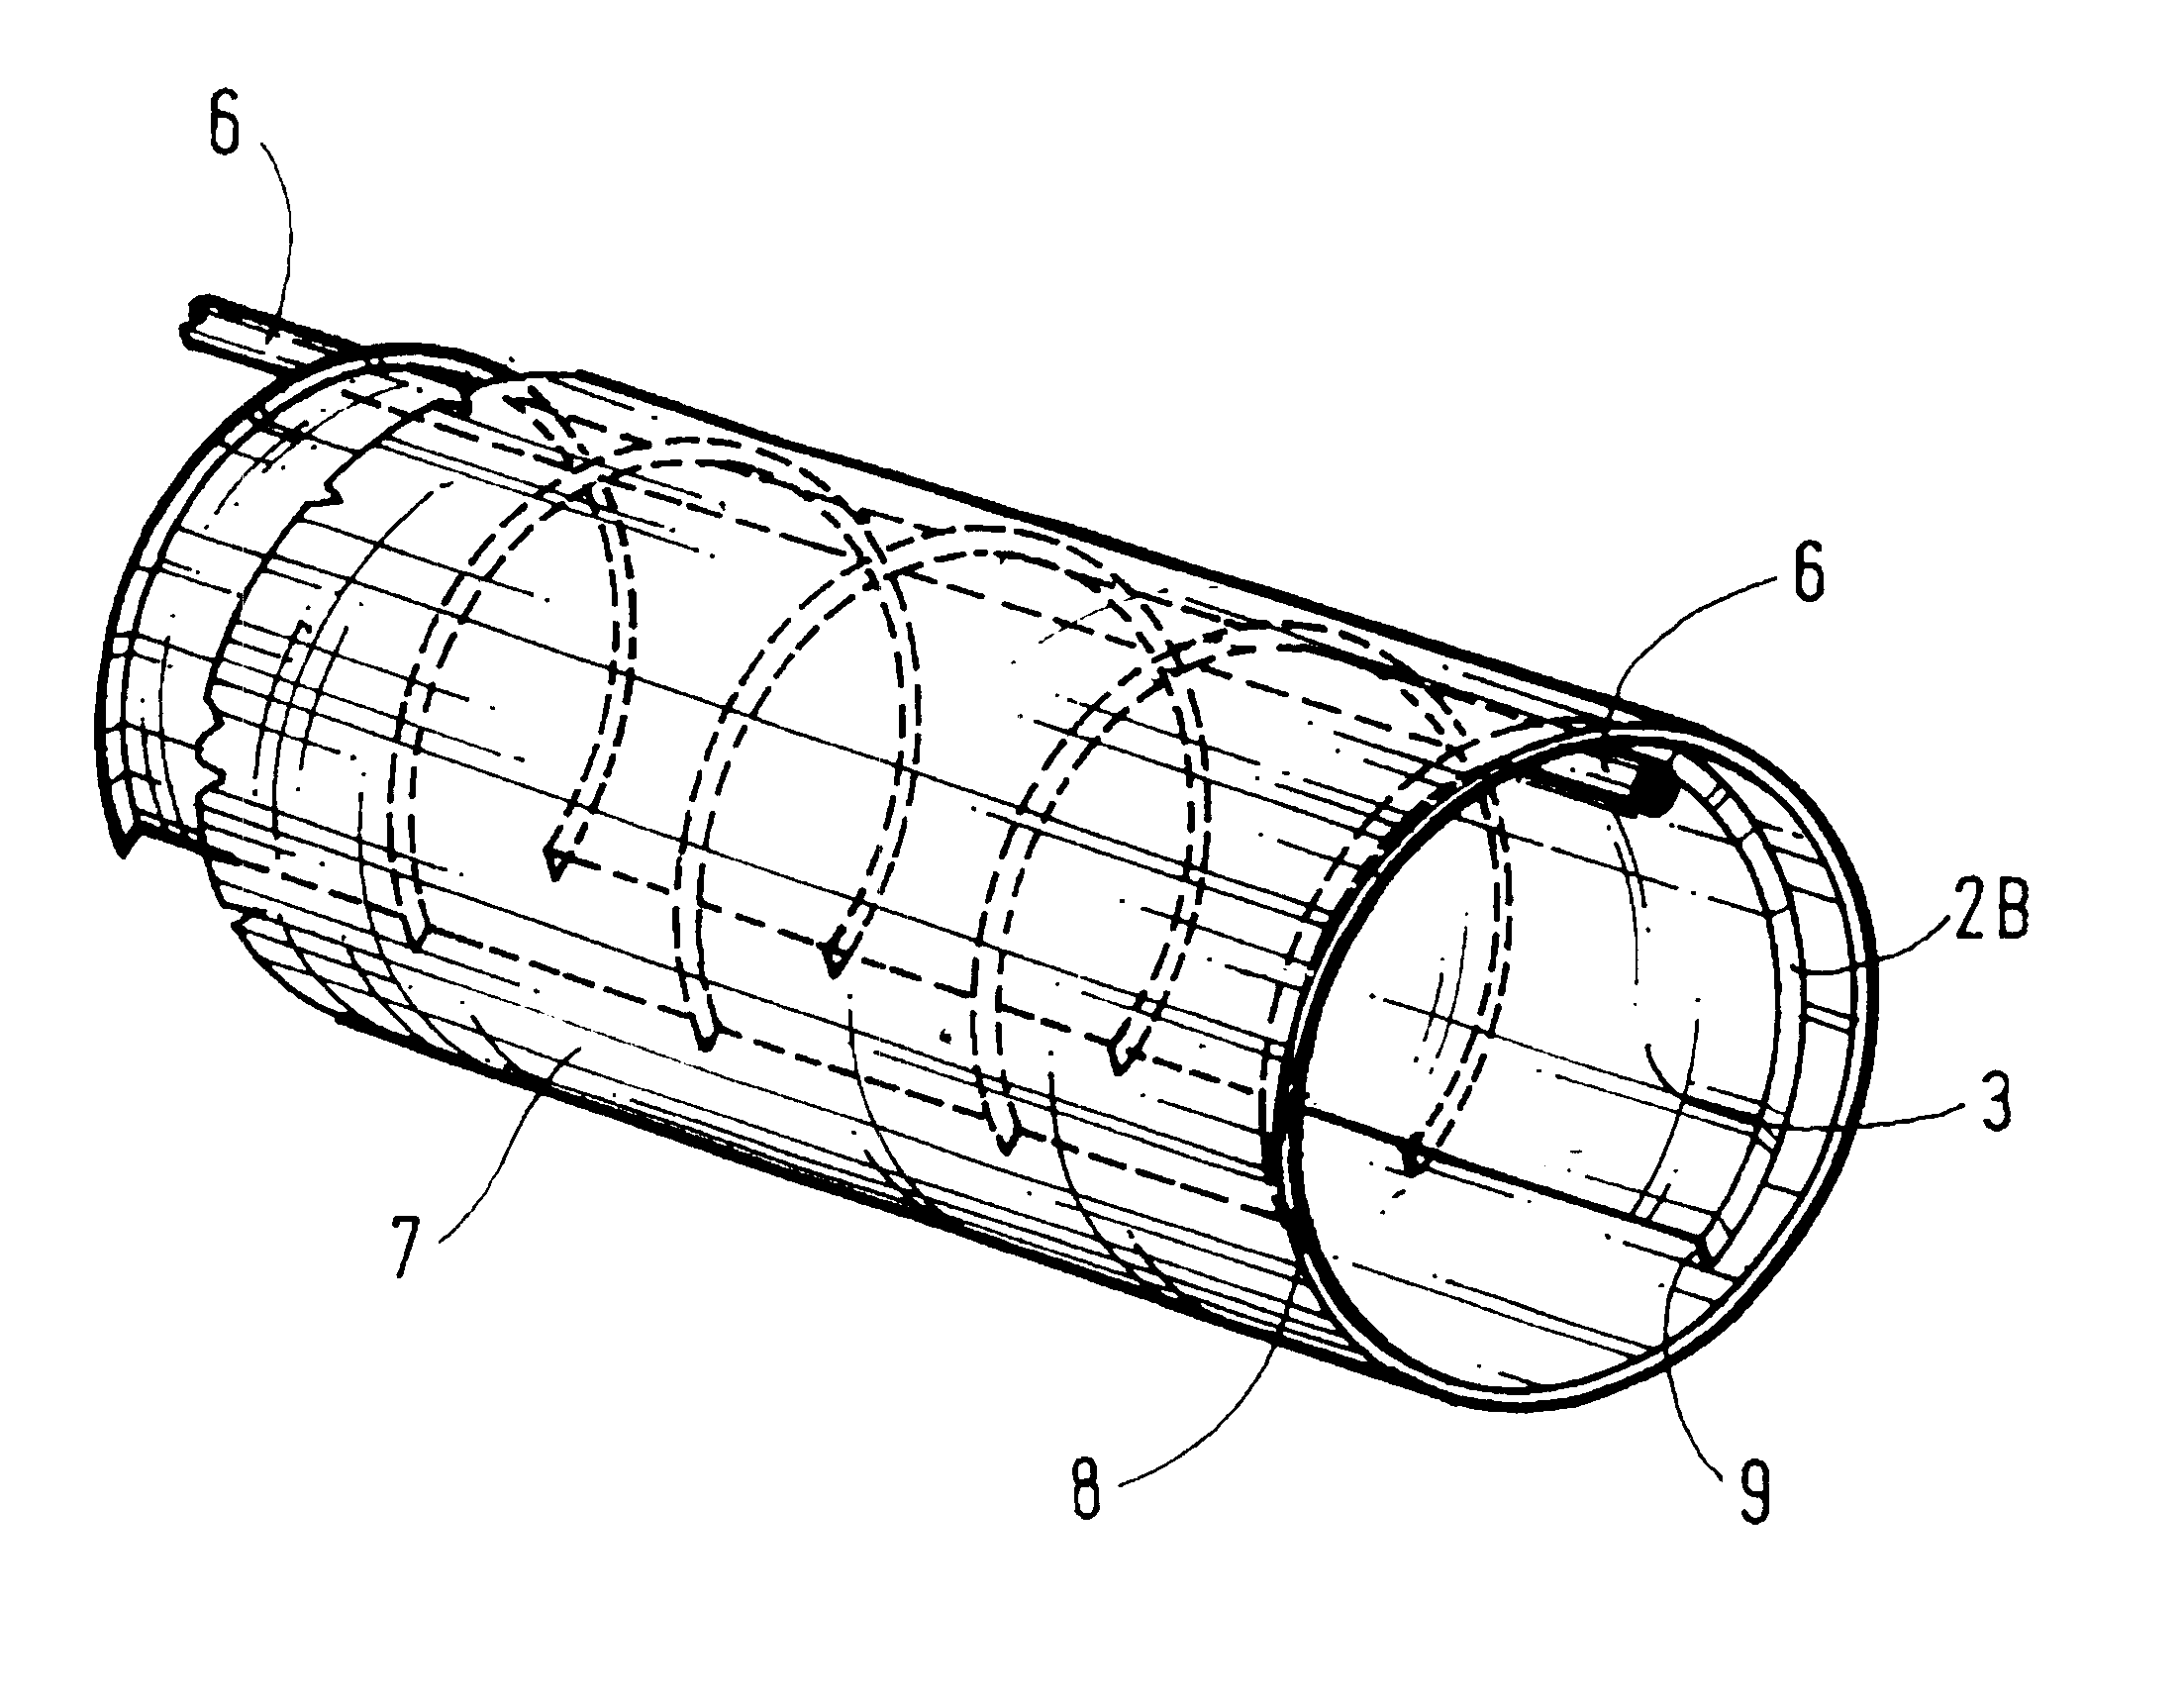 Device for fixing a tubular element in an inaccessible cavity